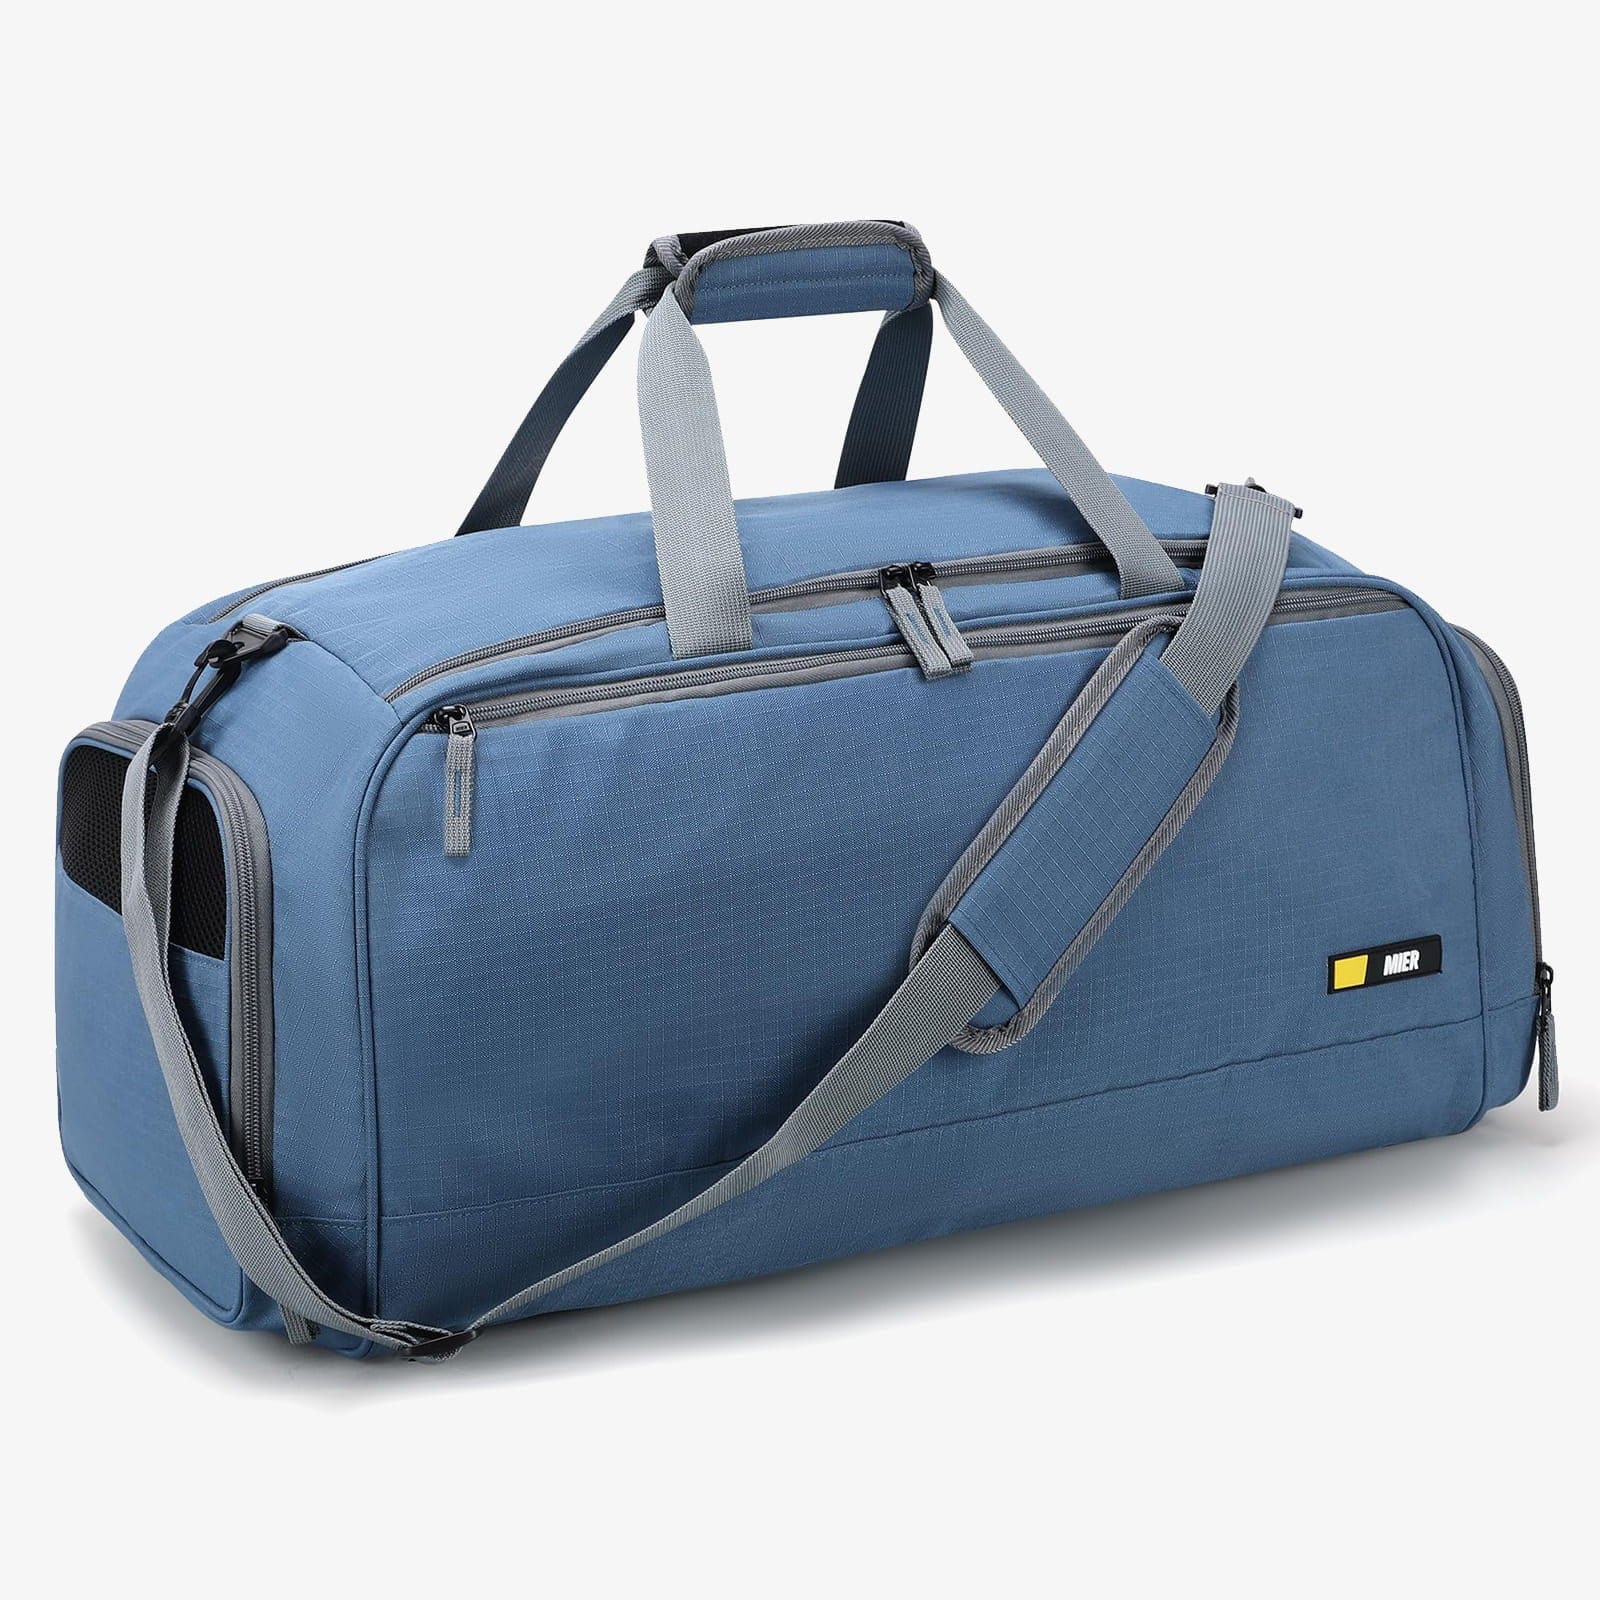 Lightweight Canvas Duffle Bags for Men & Women for Traveling, The Gym, and As Sports Equipment Bag/Organizer